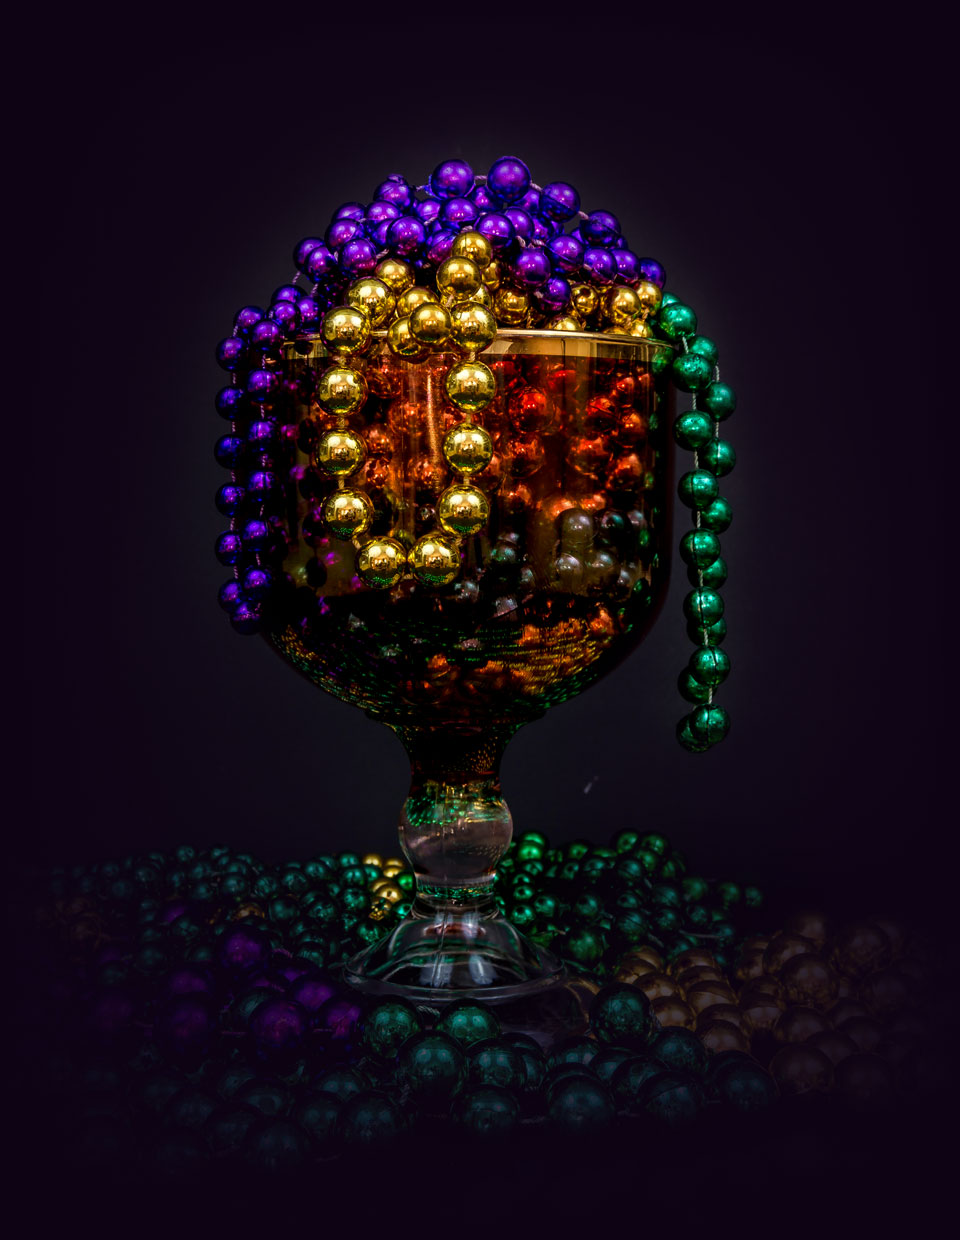 Most Beads Wins the Grand Prize